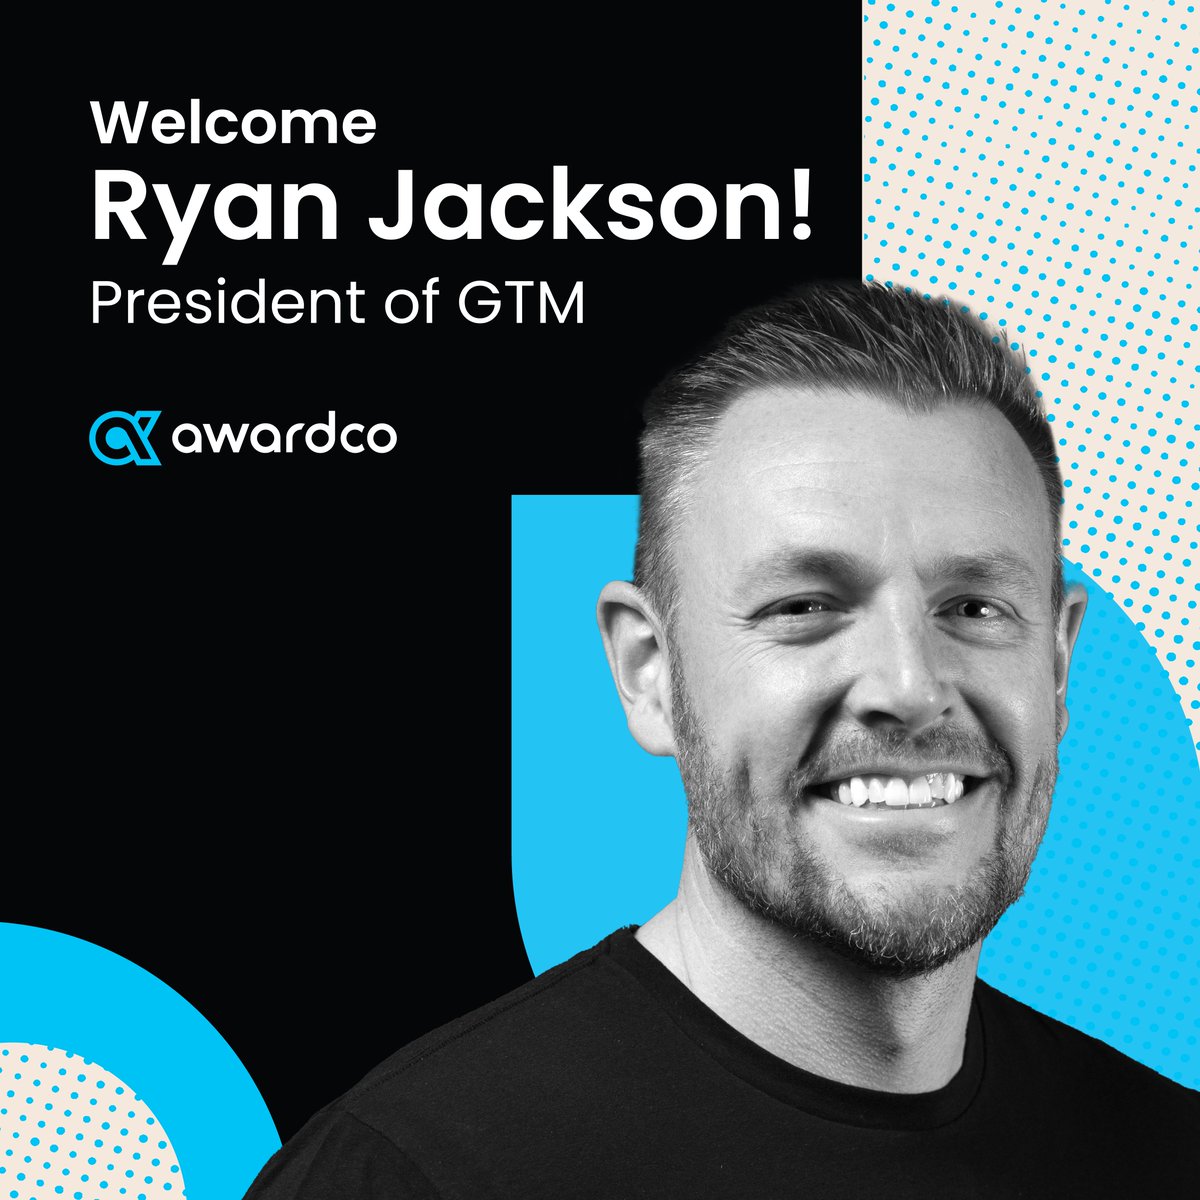 Awardco is pleased to announce the appointment of Ryan Jackson as President of GTM. With over 15 years of experience in leadership roles at industry-leading companies Qualtrics and MX, Ryan brings a wealth of knowledge and expertise to the Awardco team. #leadership #culture